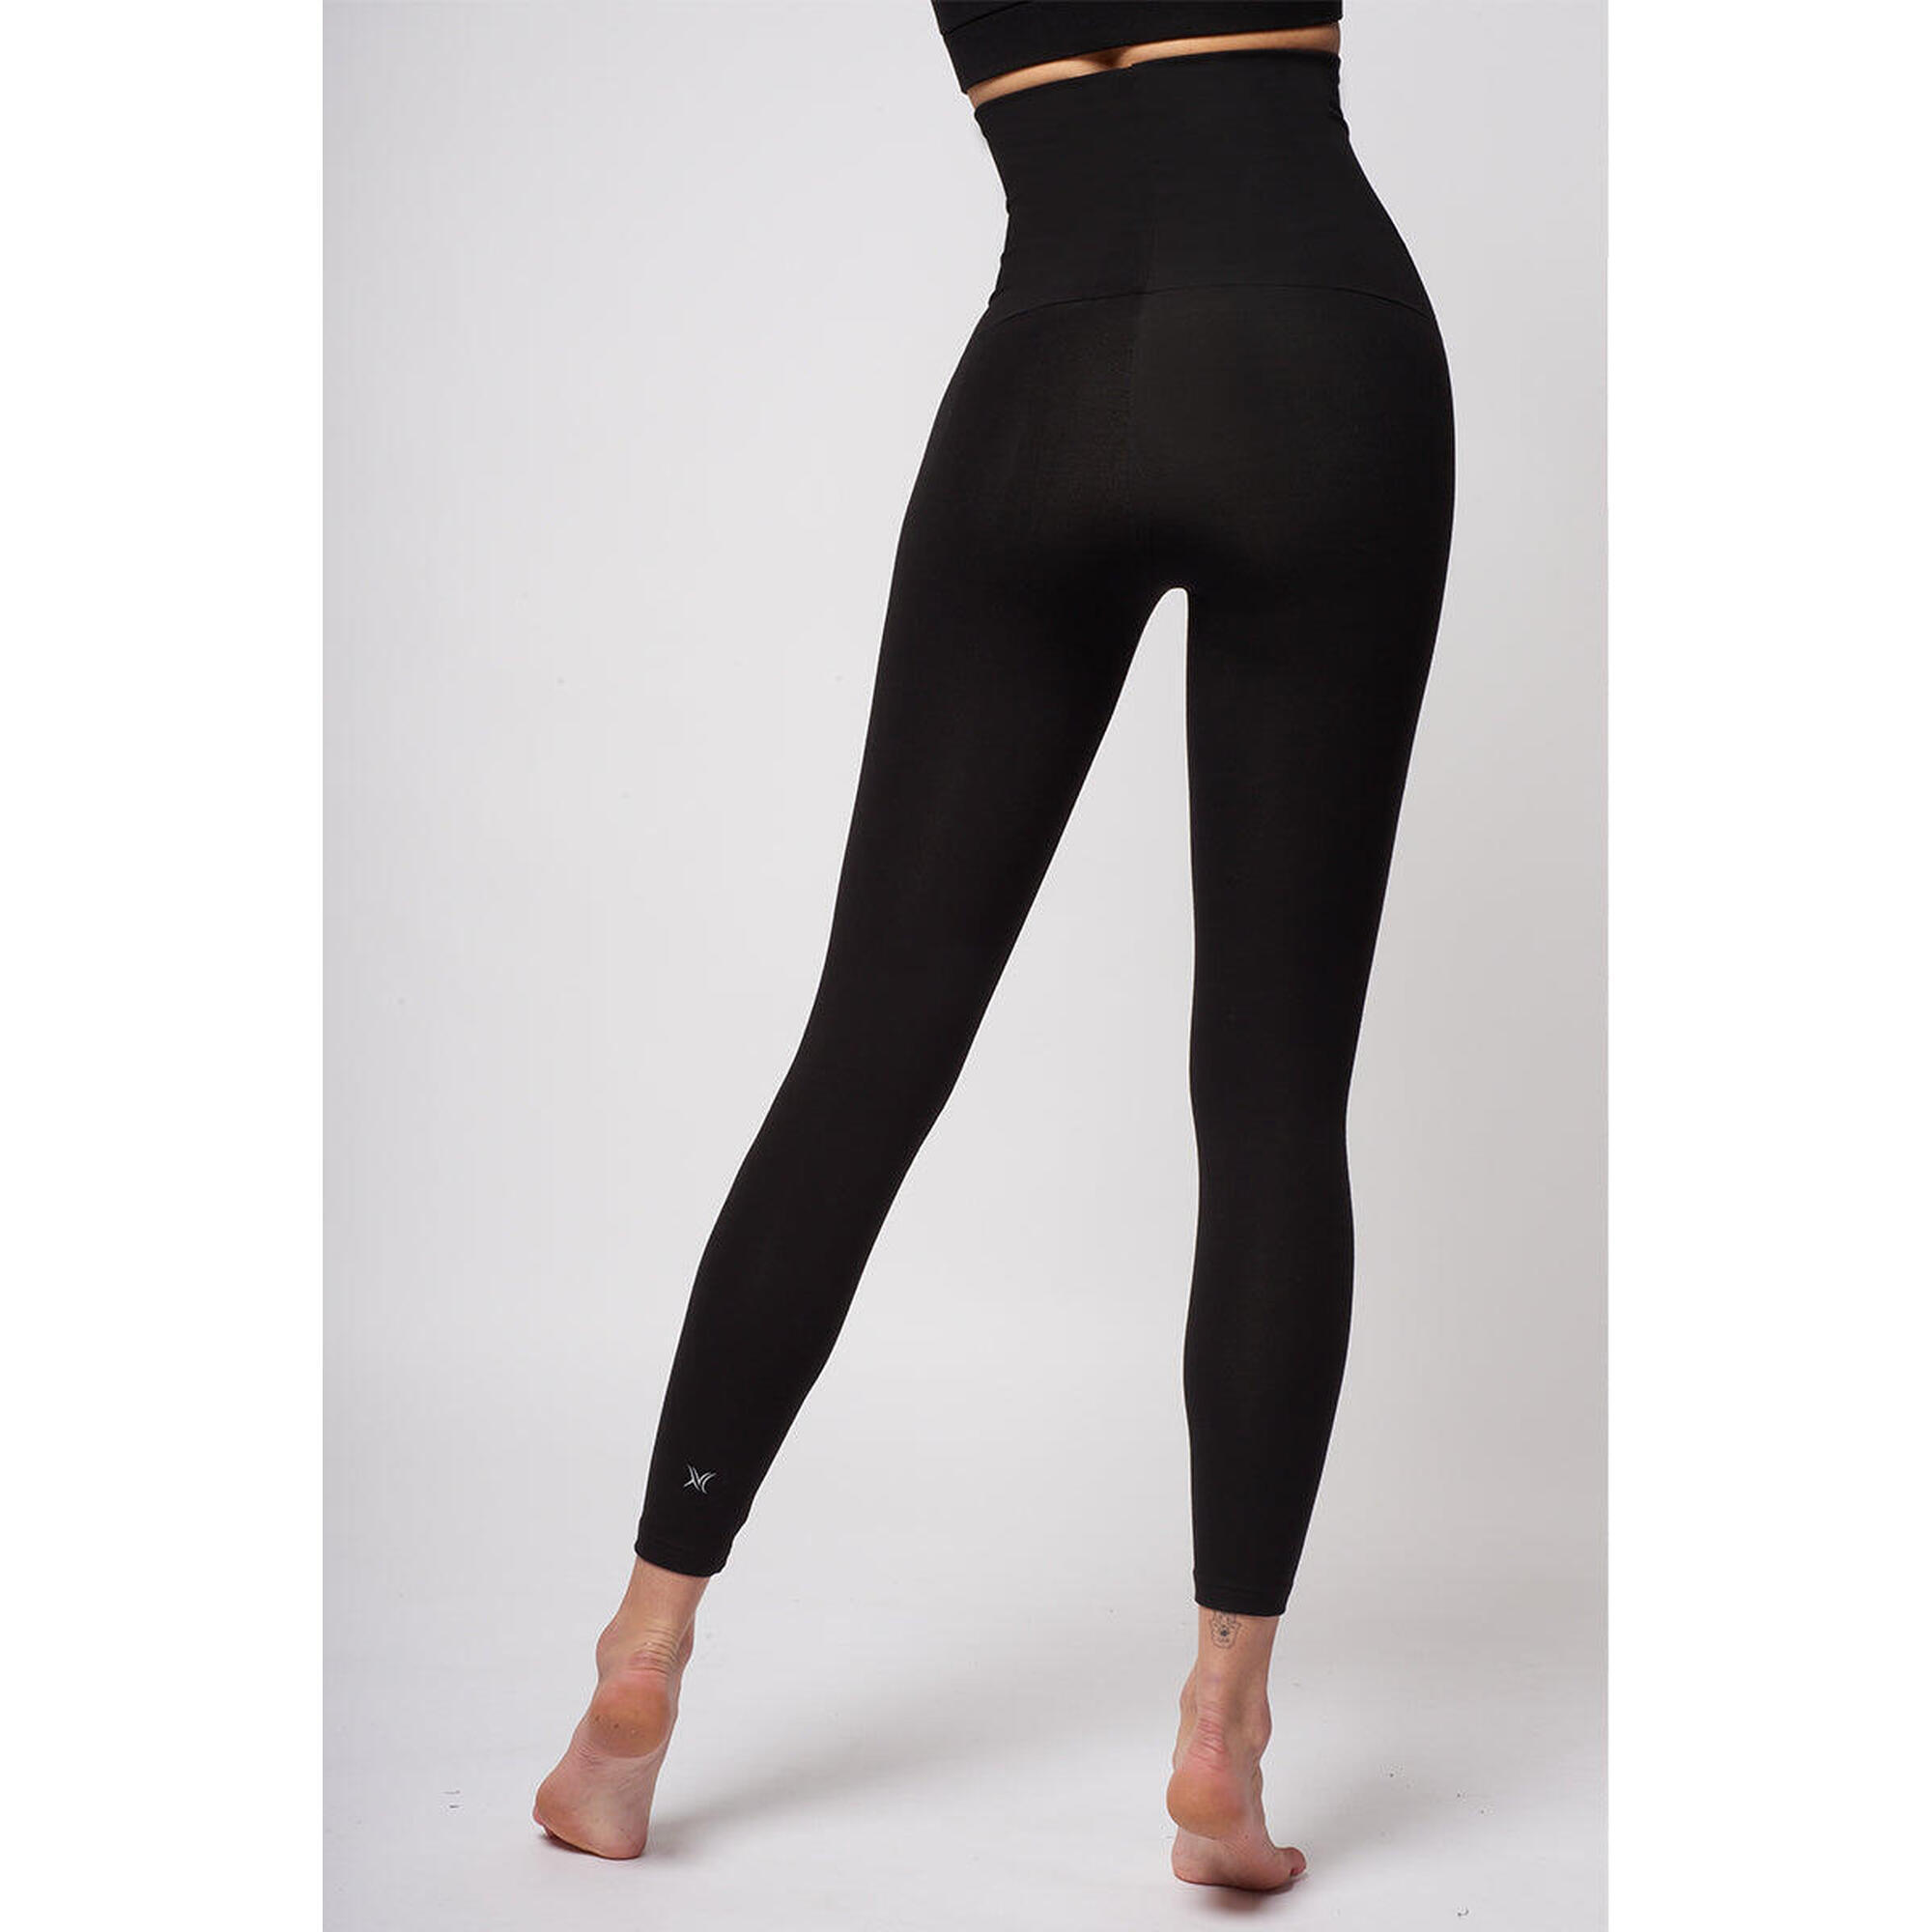 Extra Strong Compression Leggings with High Waisted Tummy Control Long Leg Black 2/7